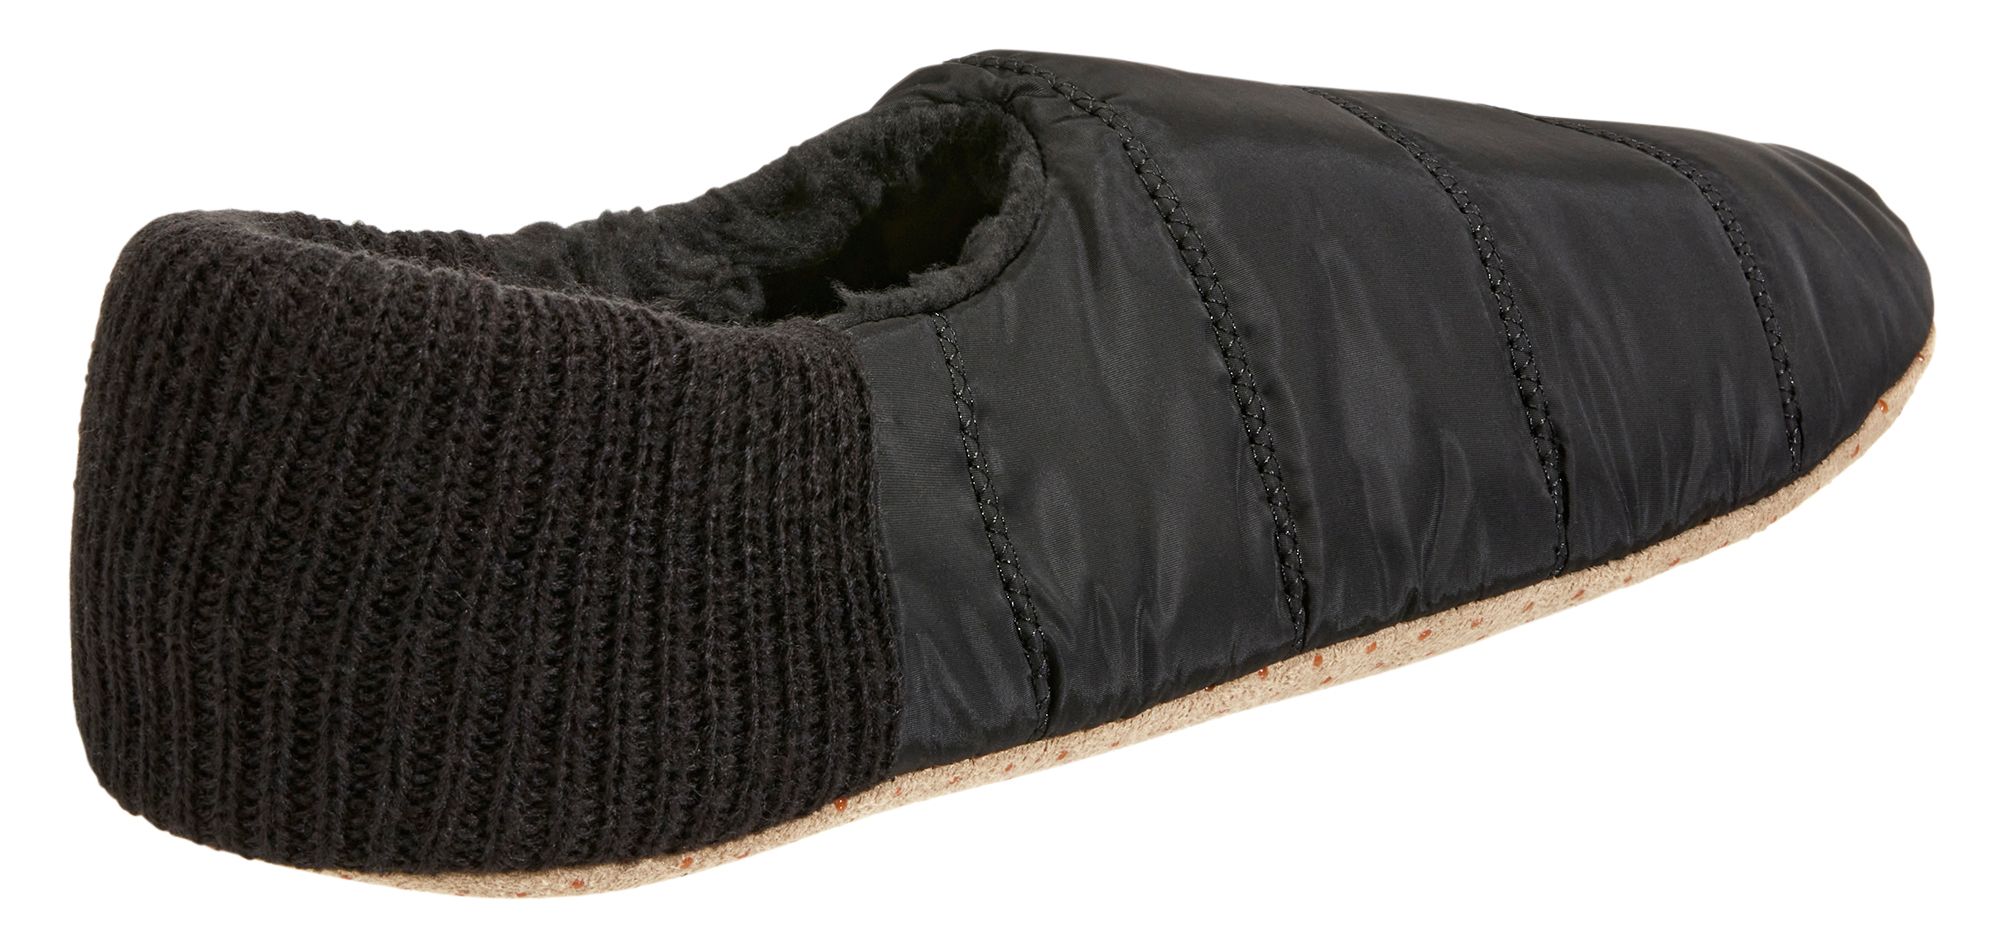 Northeast Outfitters Cozy Cabin Men's Puffer Slippers